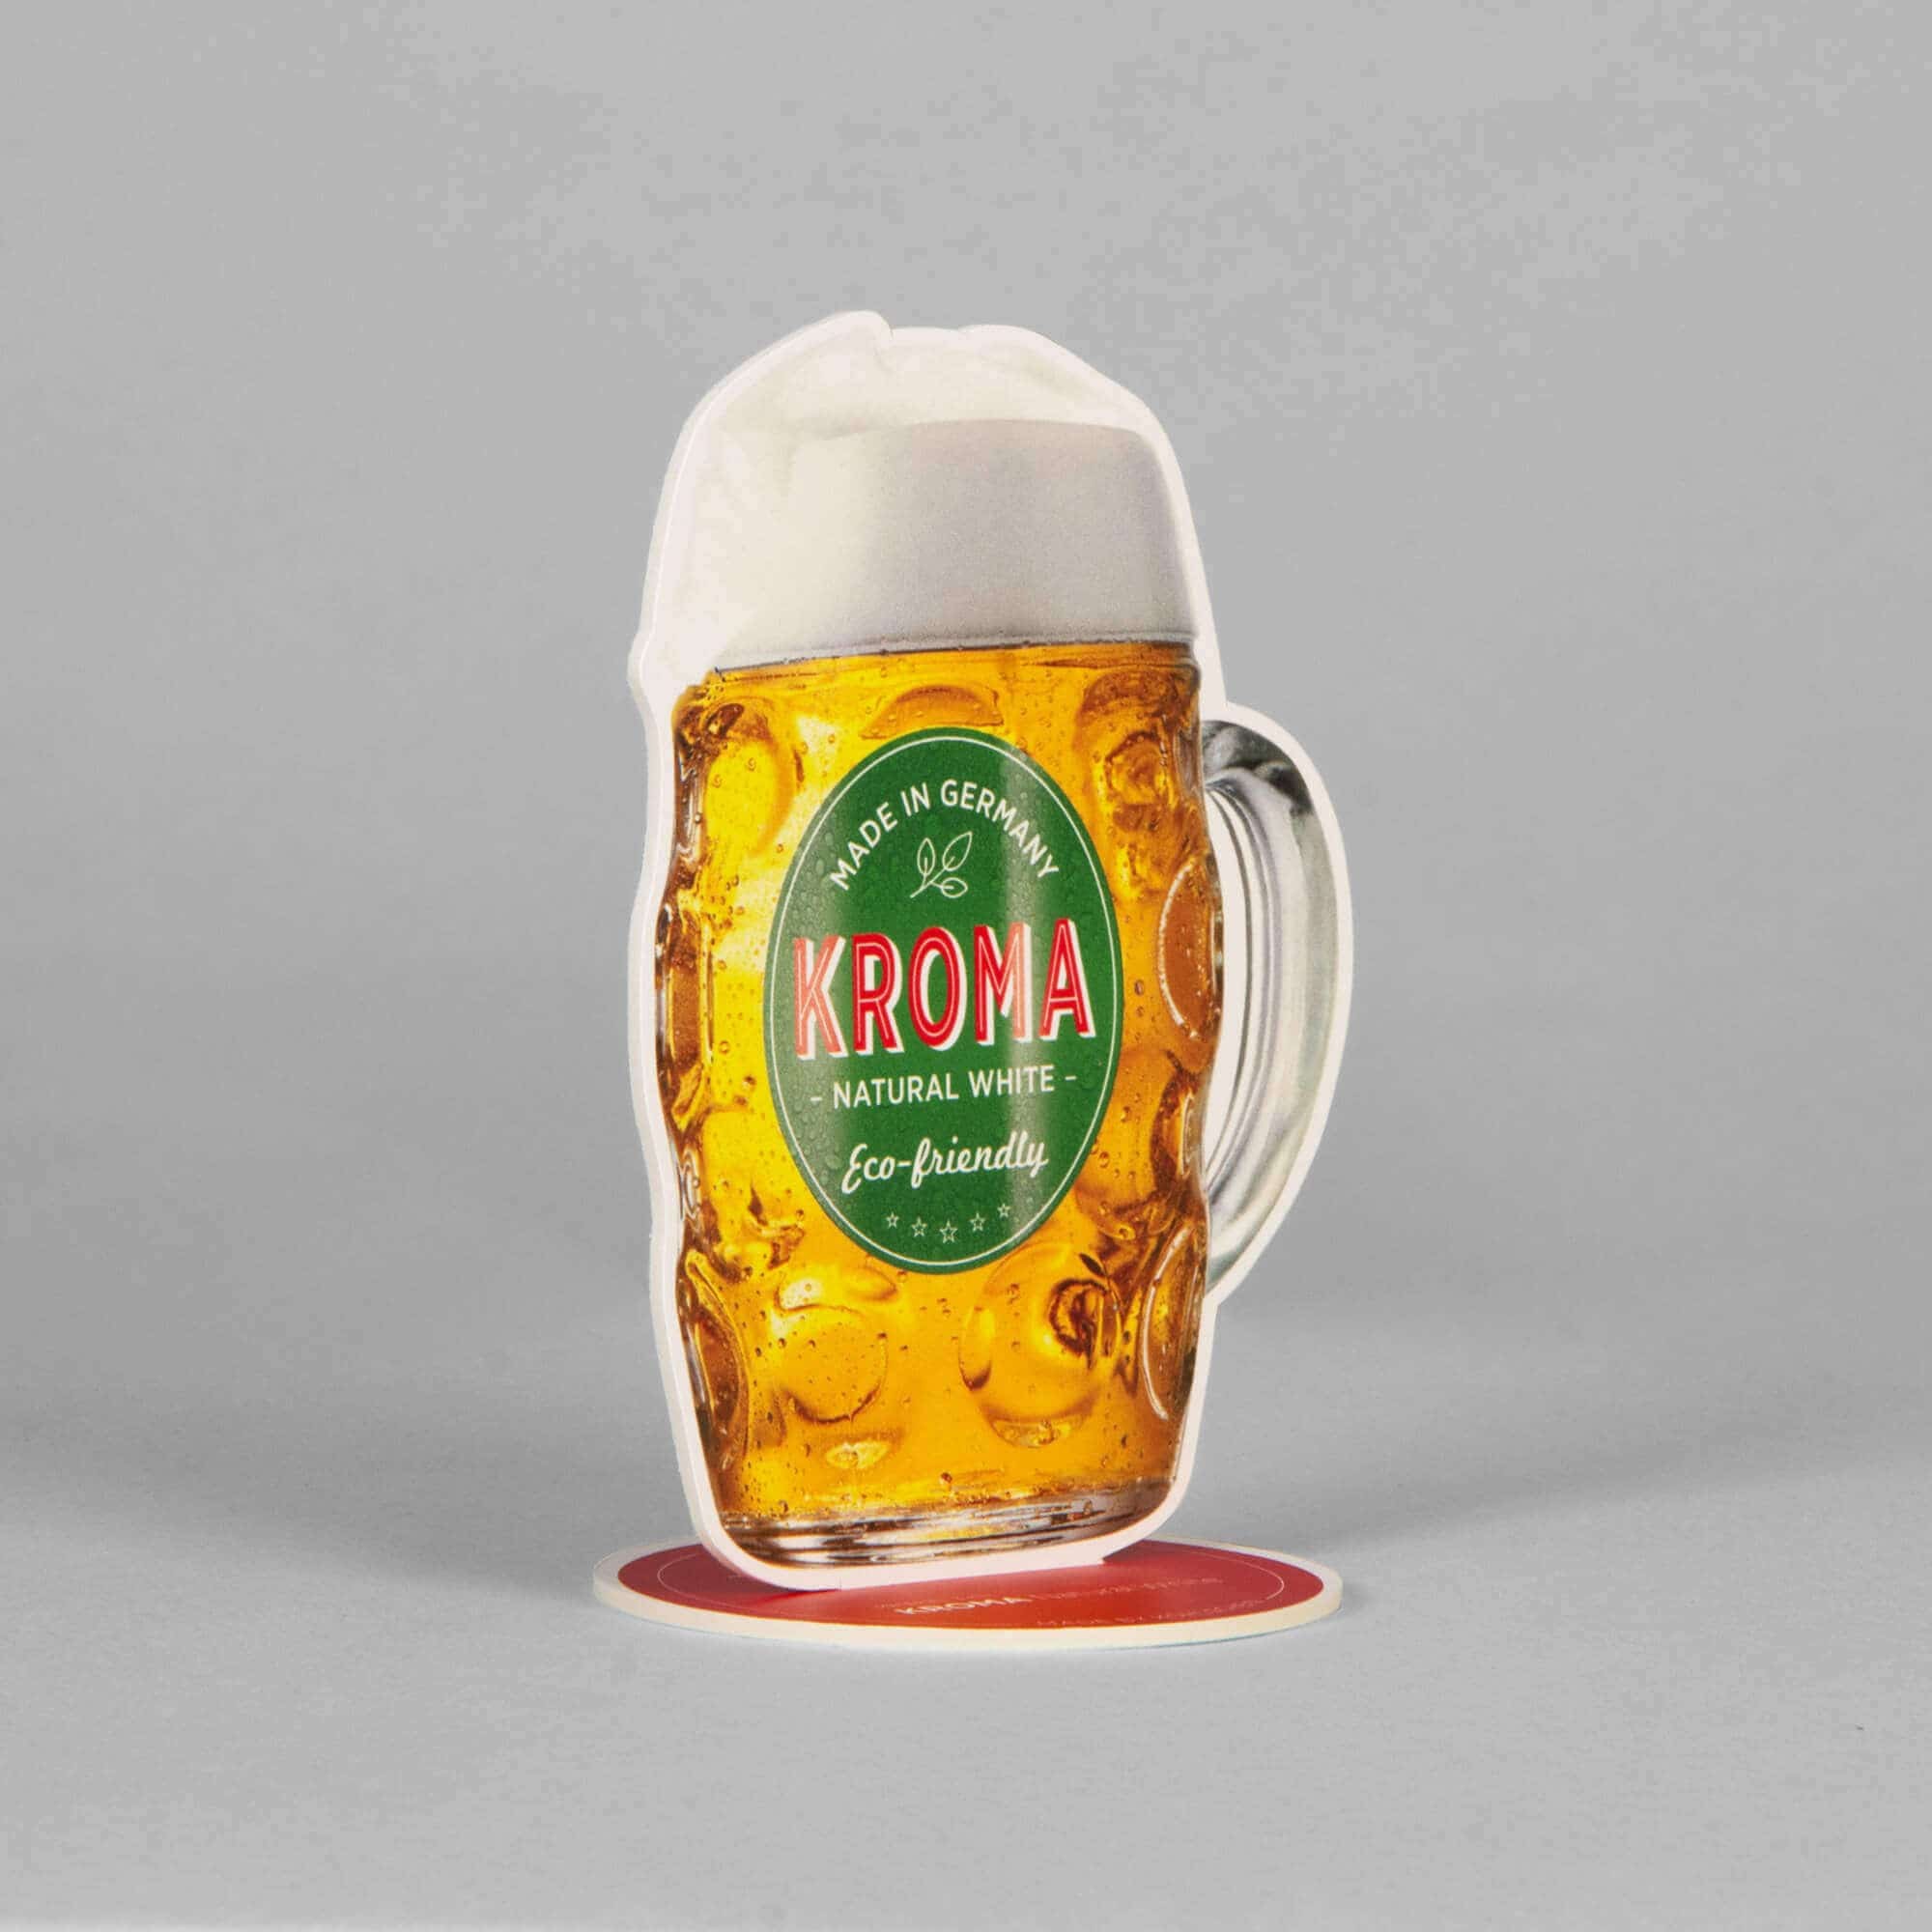 Display beer glass made of KROMA Natural White